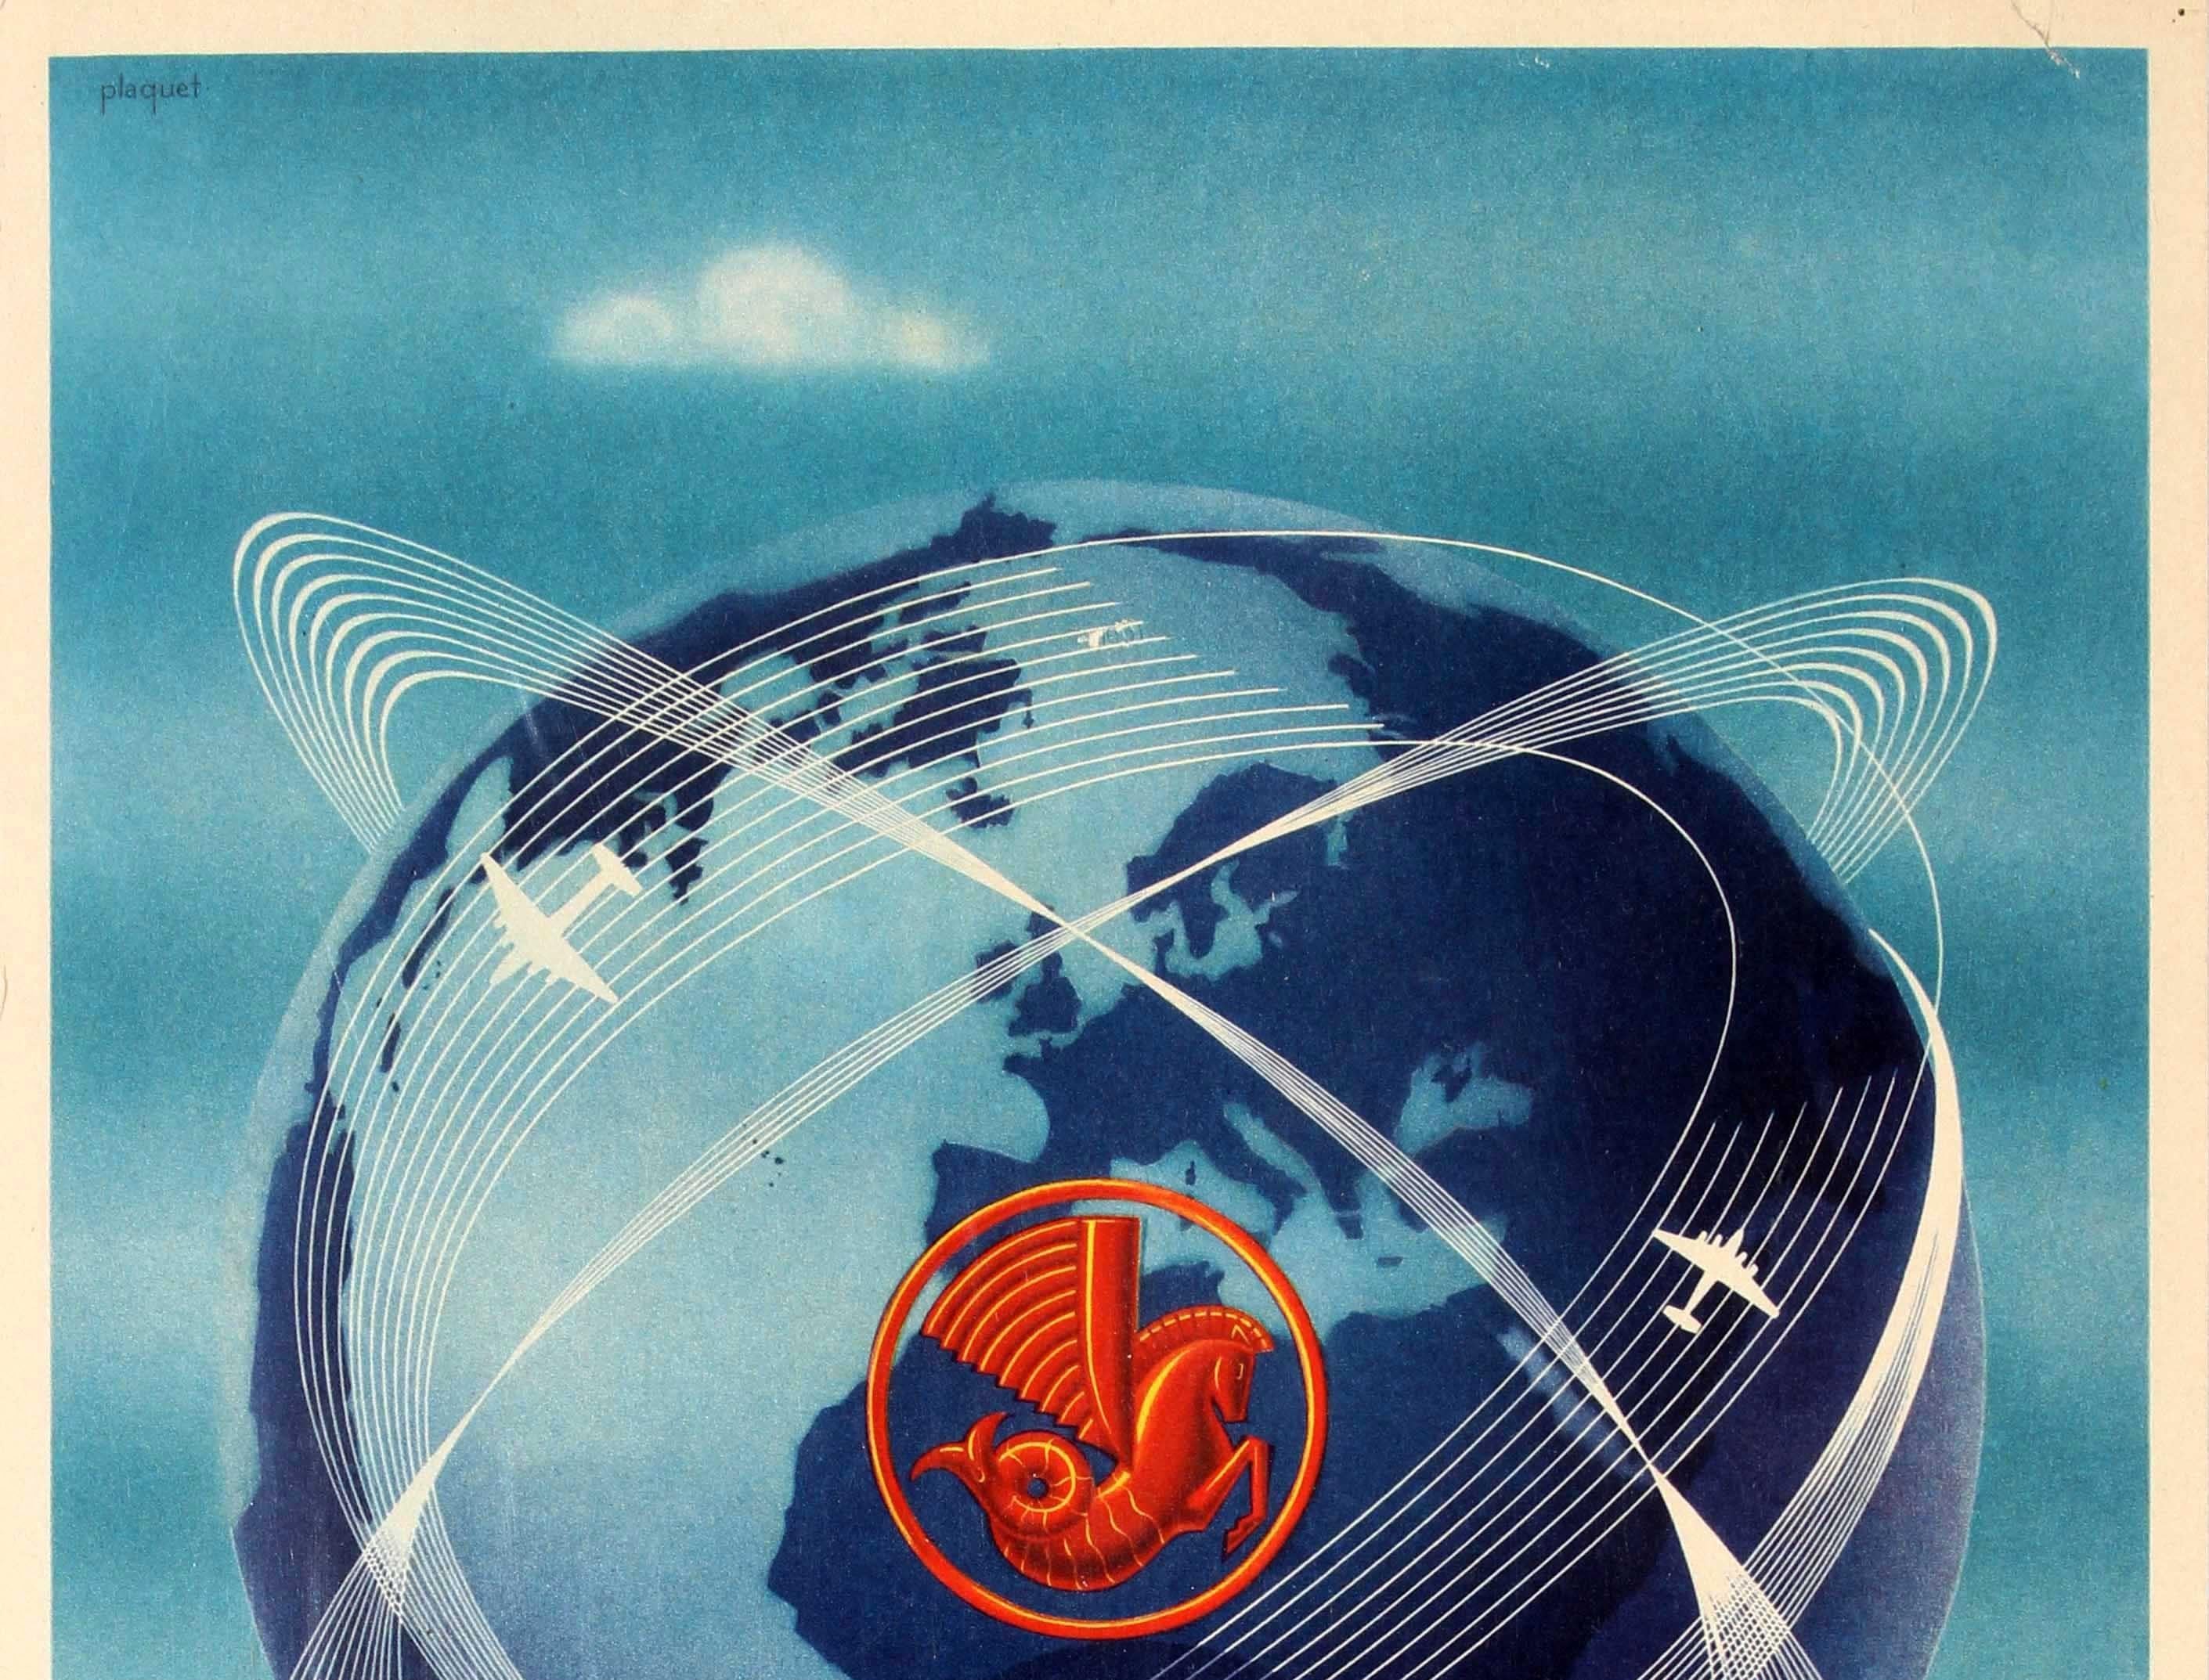 Original vintage Air France travel poster advertising its worldwide air network / Air France Reseau Aerien Mondial. Great artwork featuring two white planes flying along multiple white lines around a globe with the red Air France seahorse (pegasus /